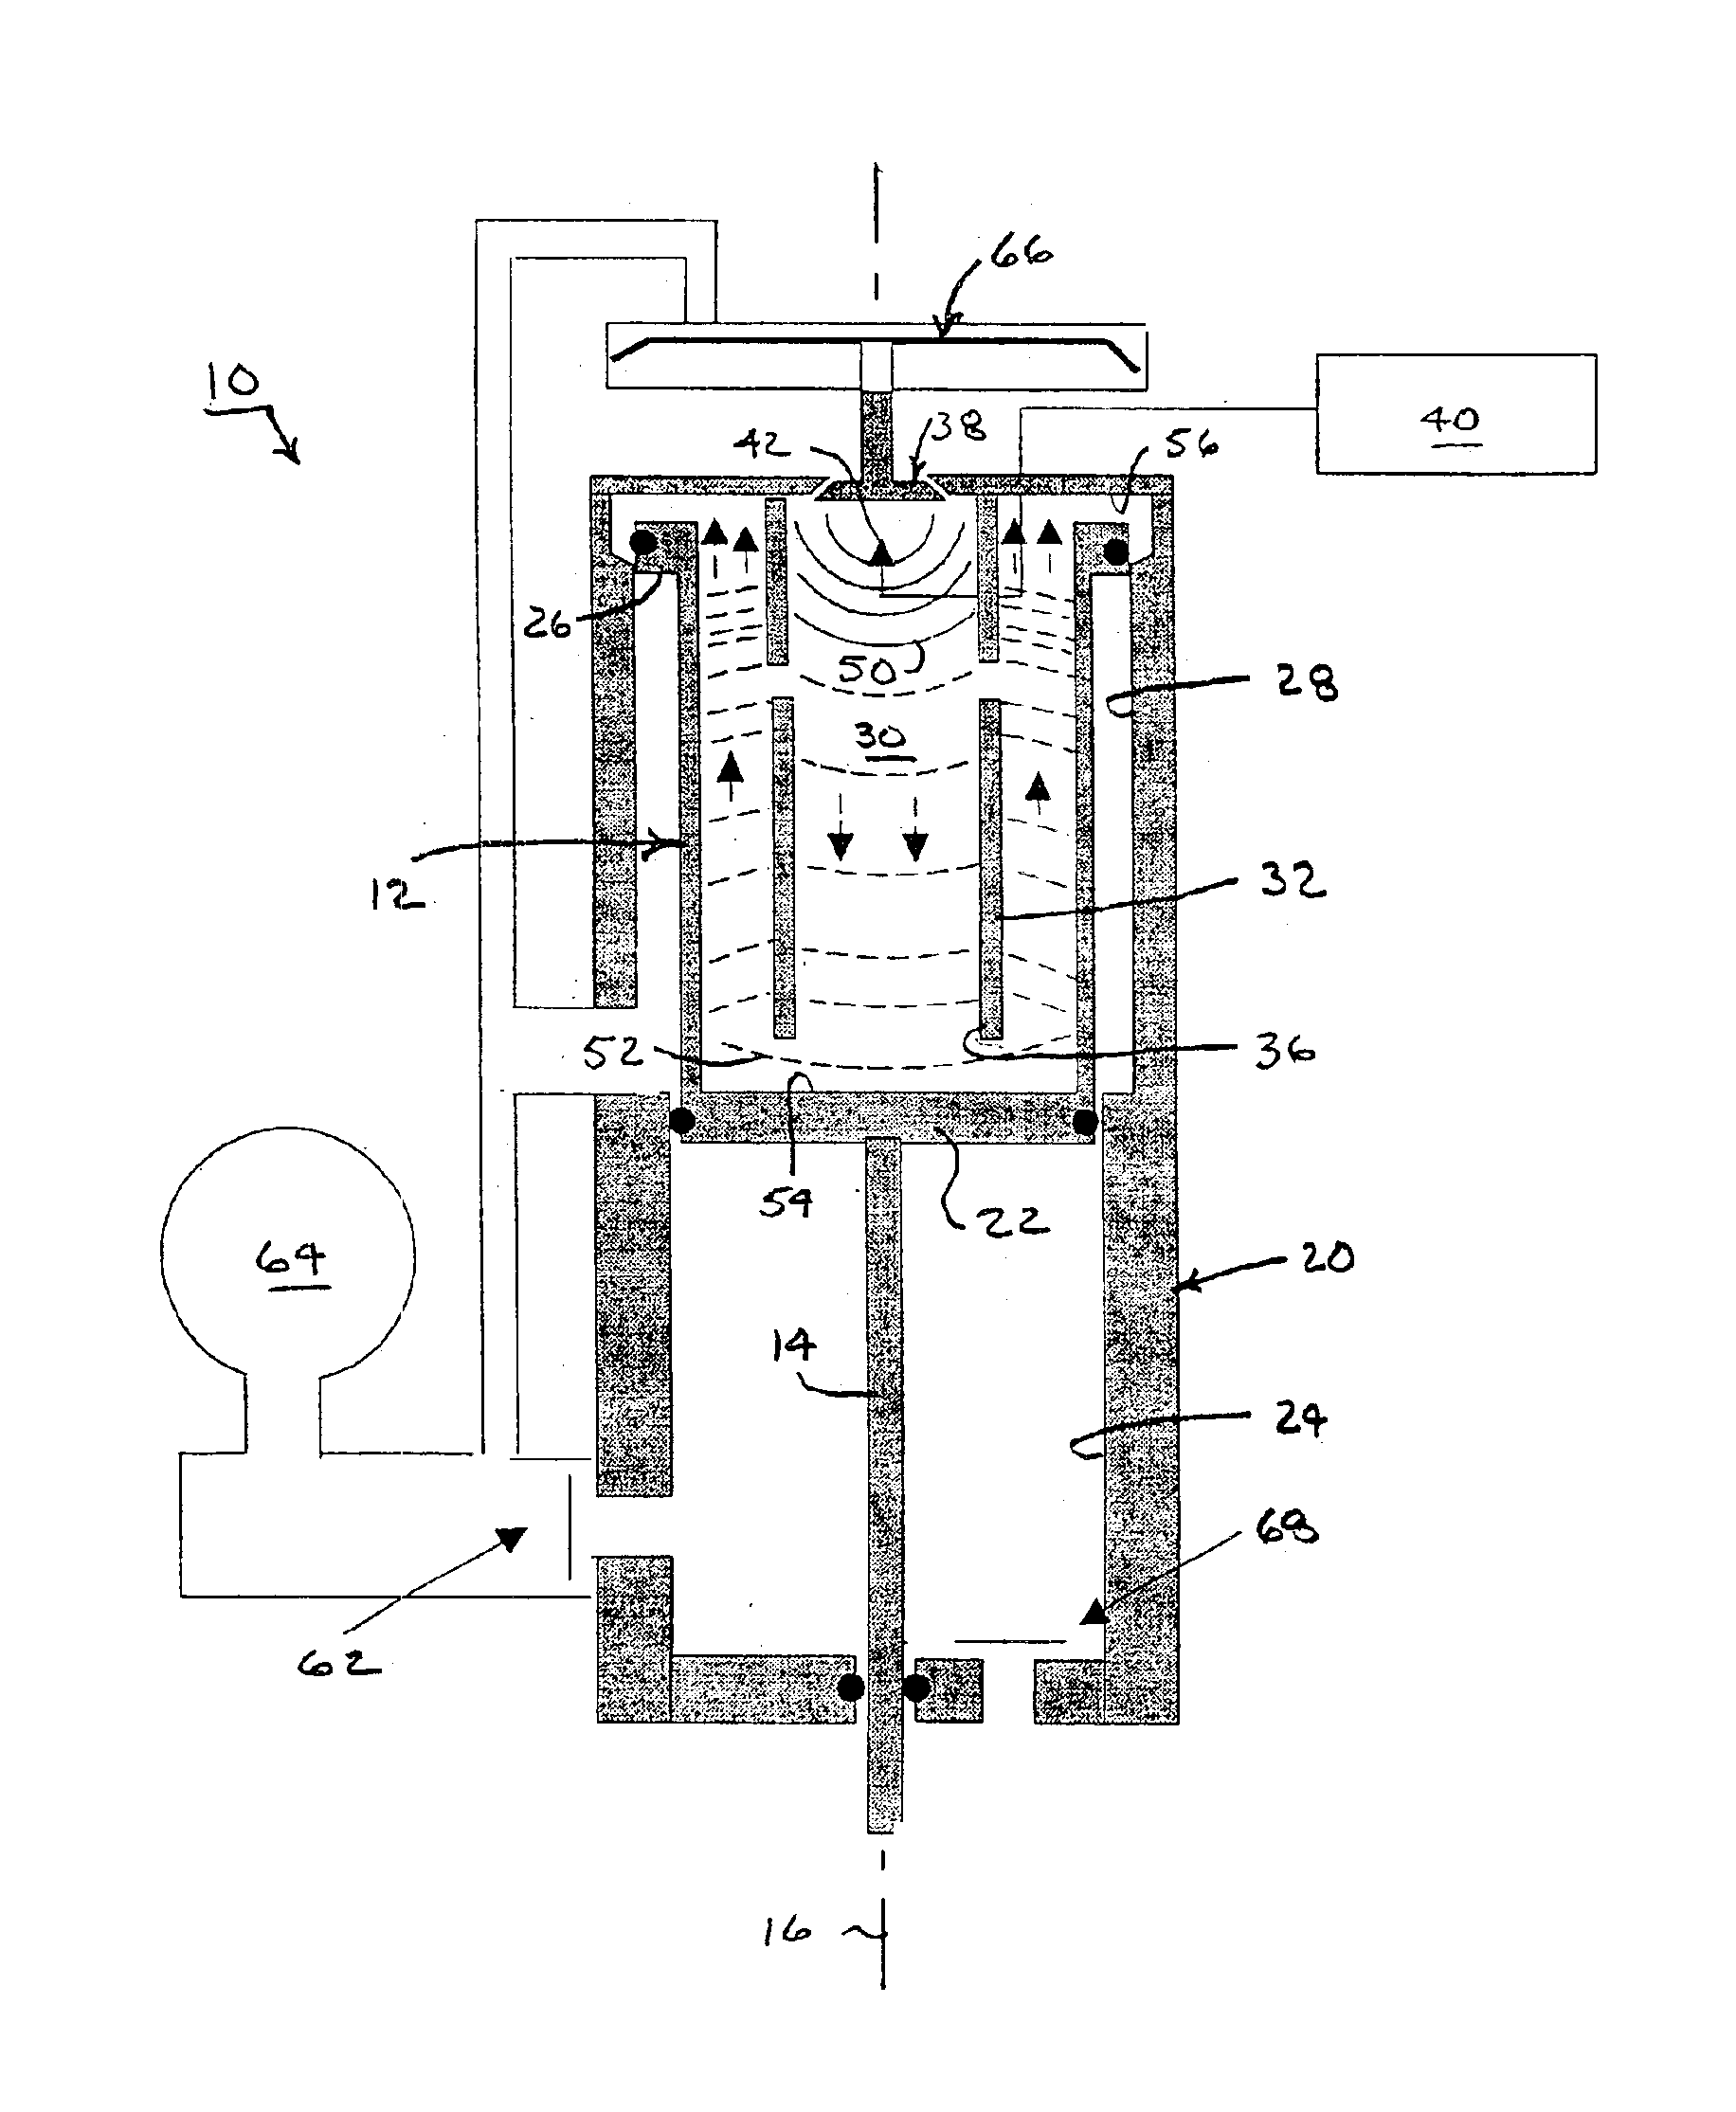 Resonant combustion chamber and recycler for linear motors